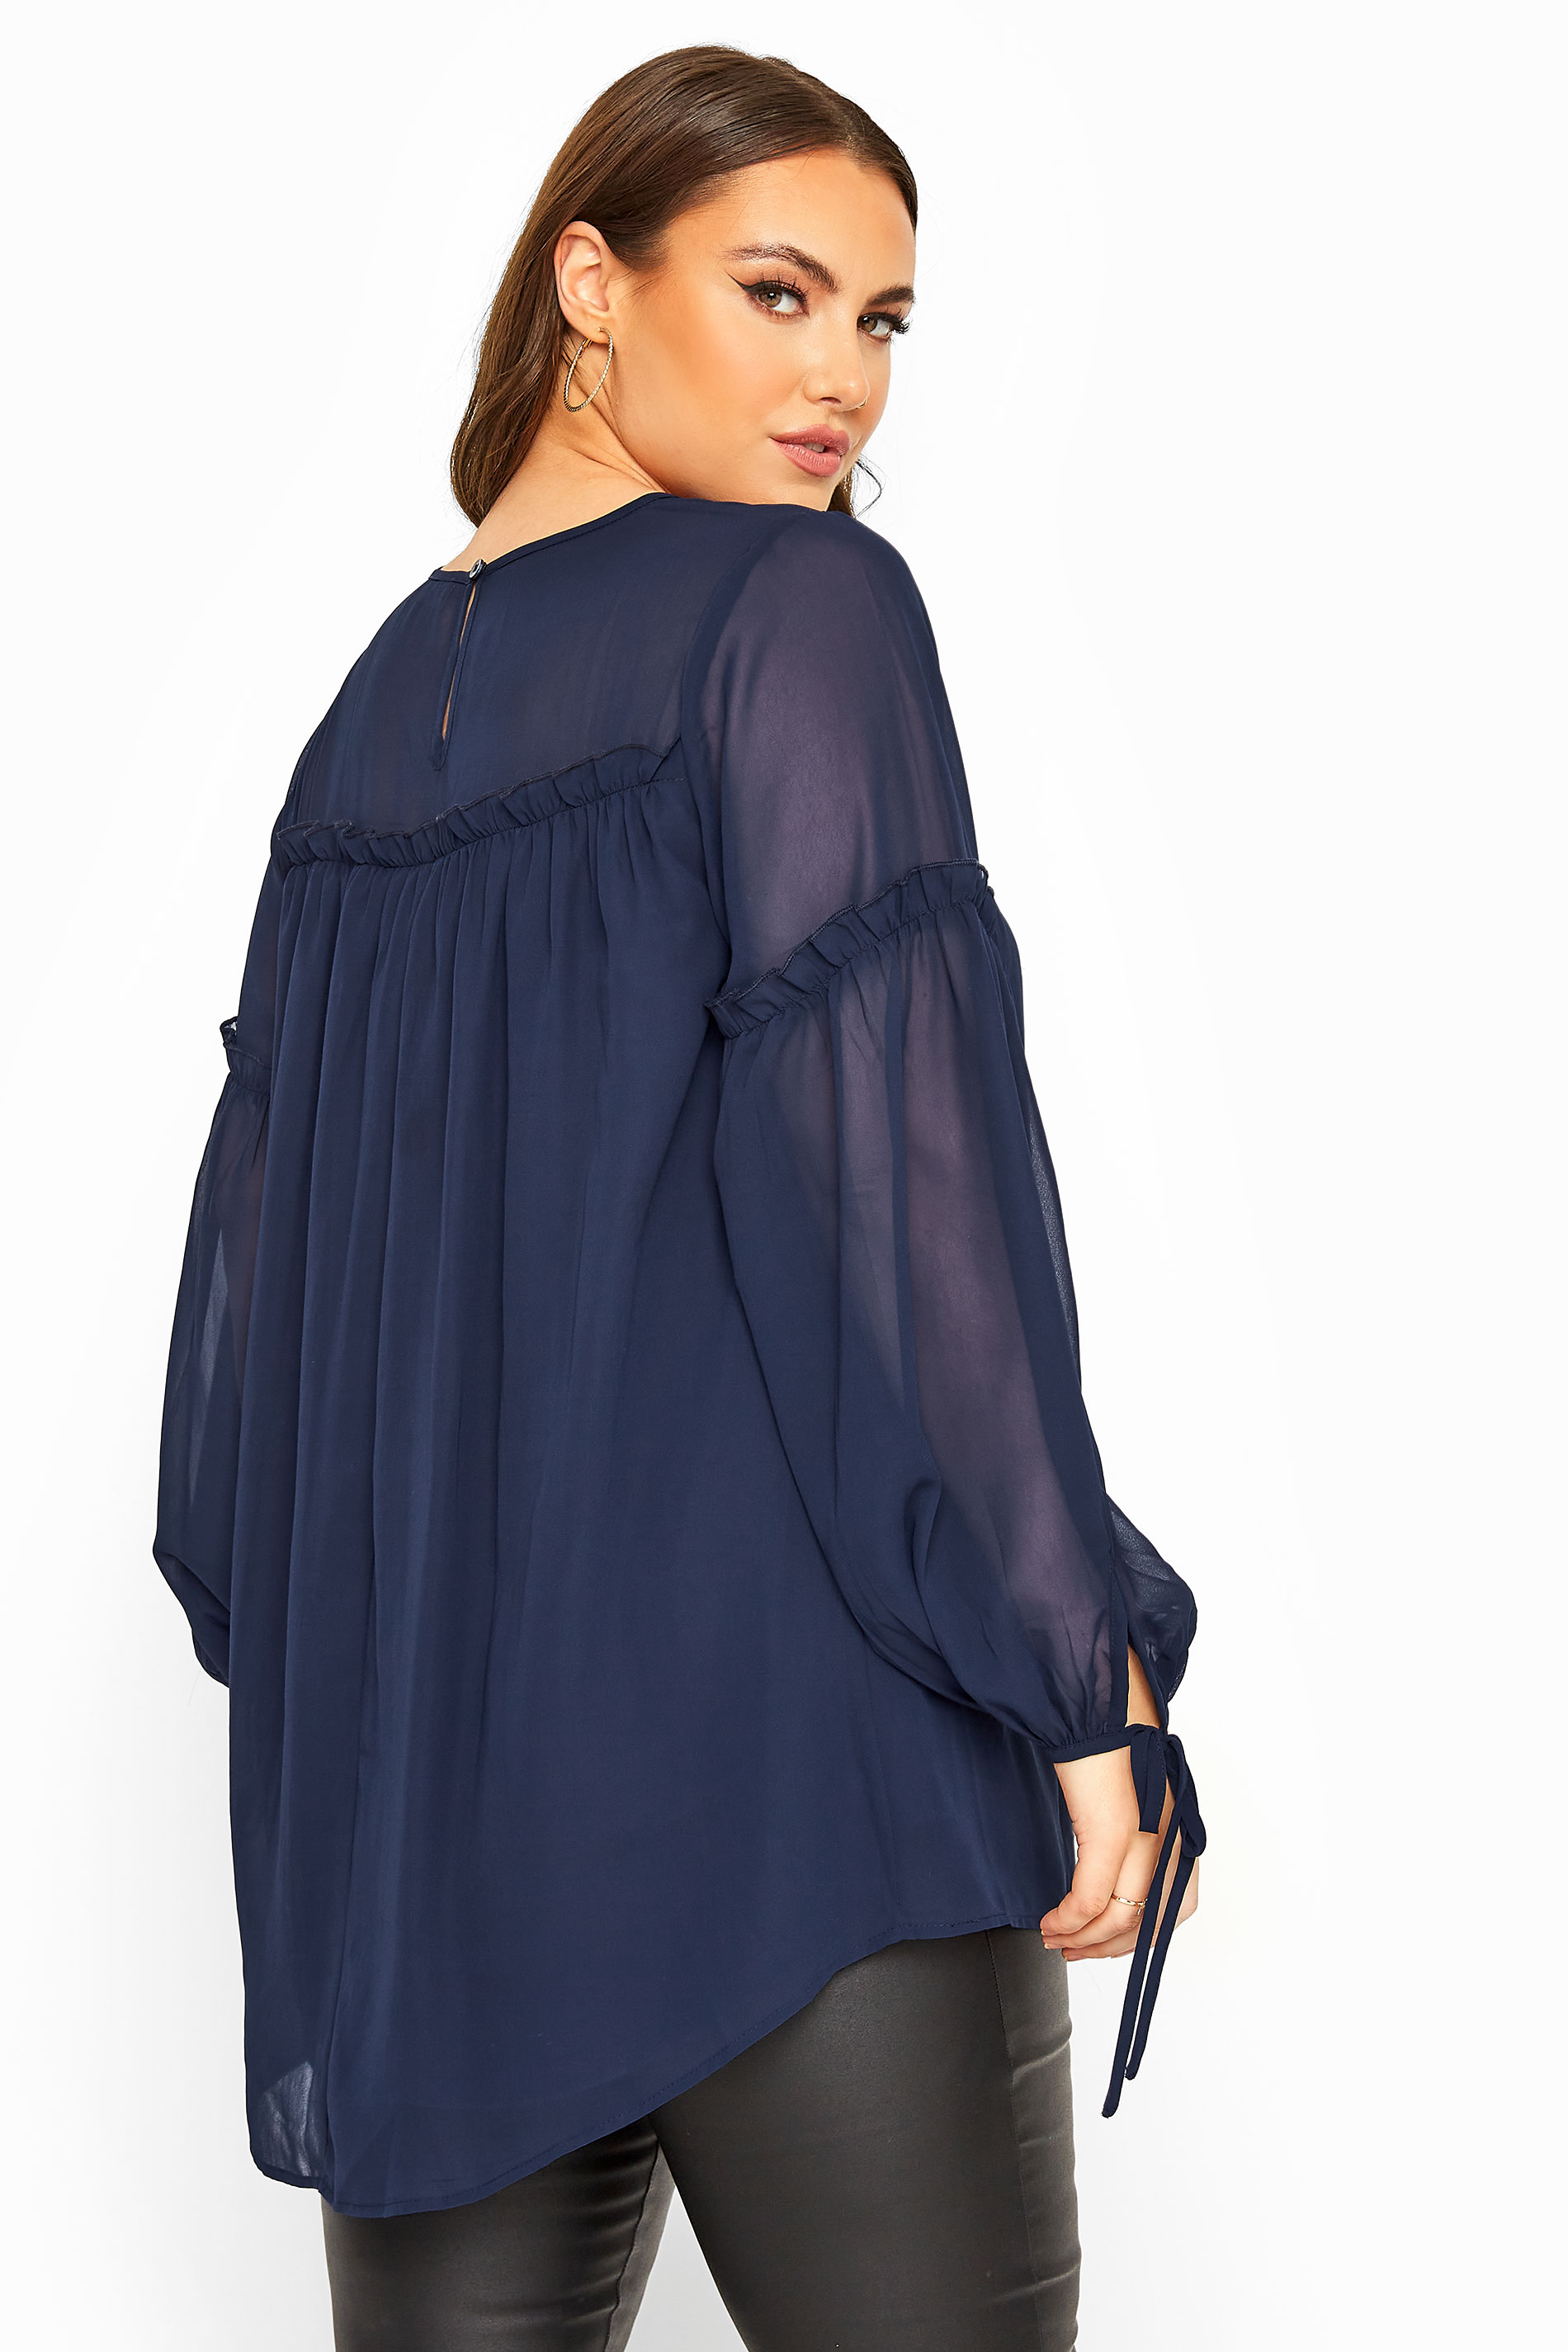 YOURS LONDON Navy Chiffon Frill Blouse | Yours Clothing